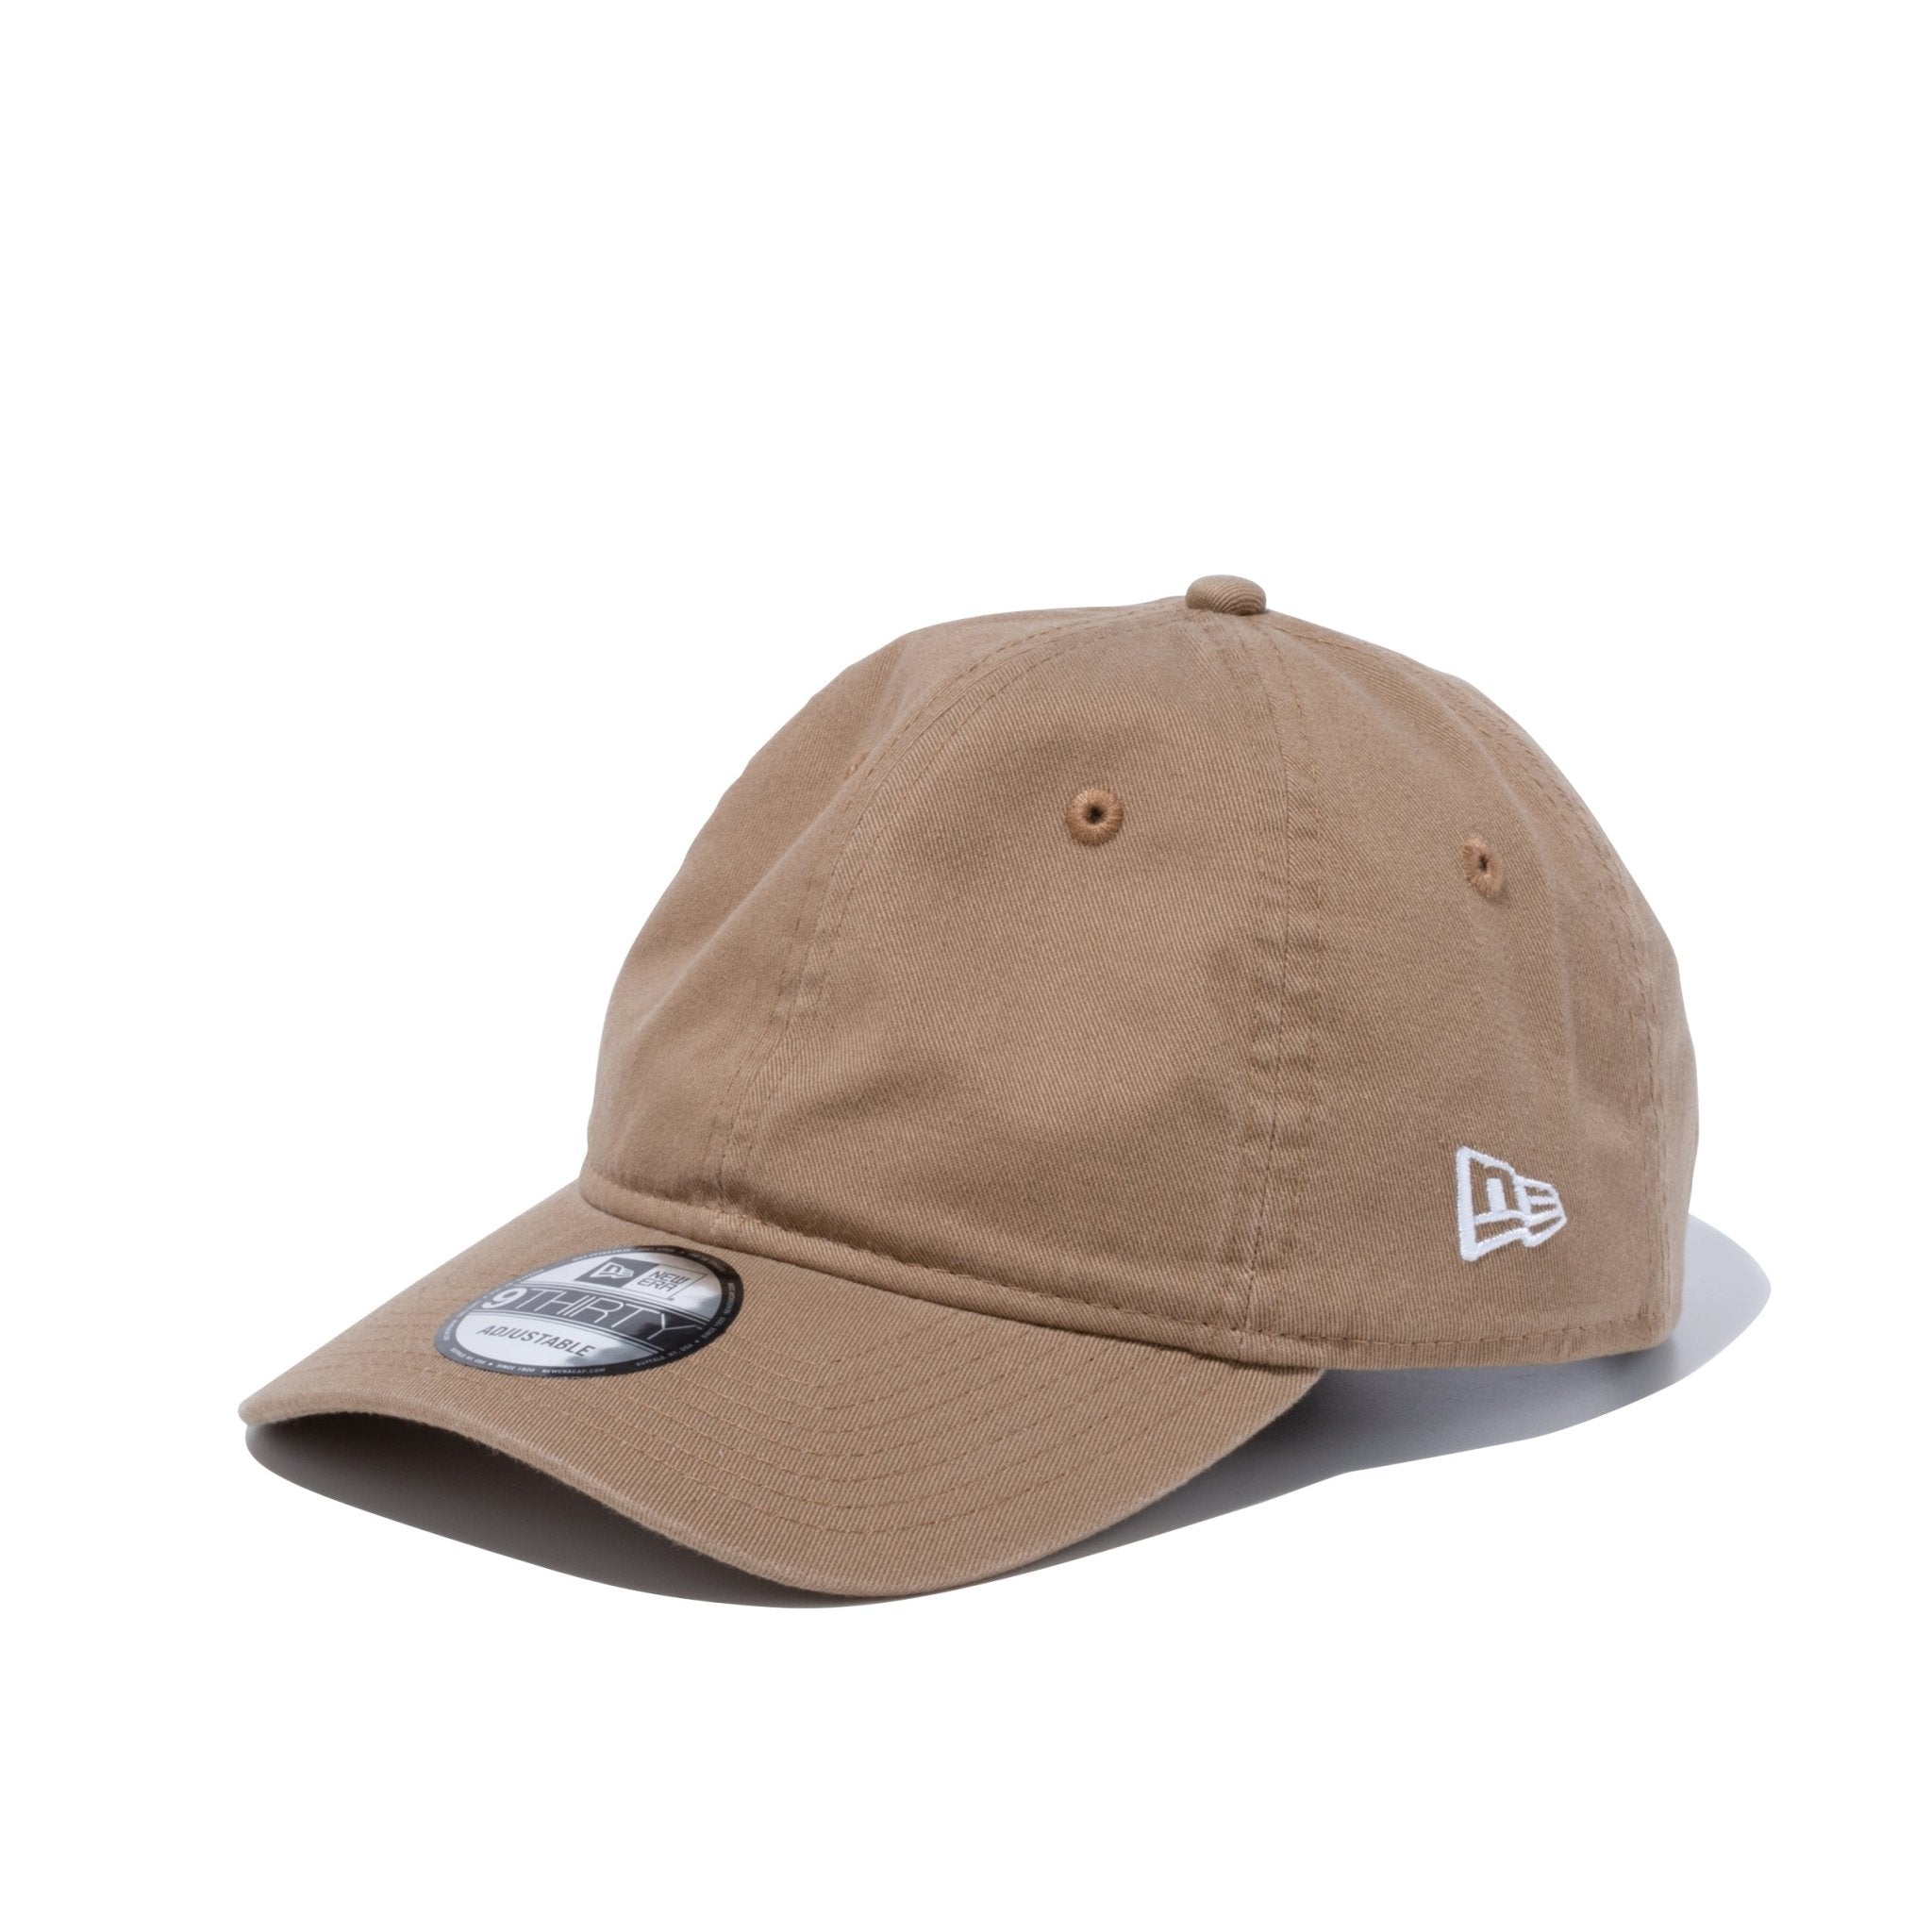 NEW ERA RC 59FIFTY Washed Cotton 7 1/4 - キャップ